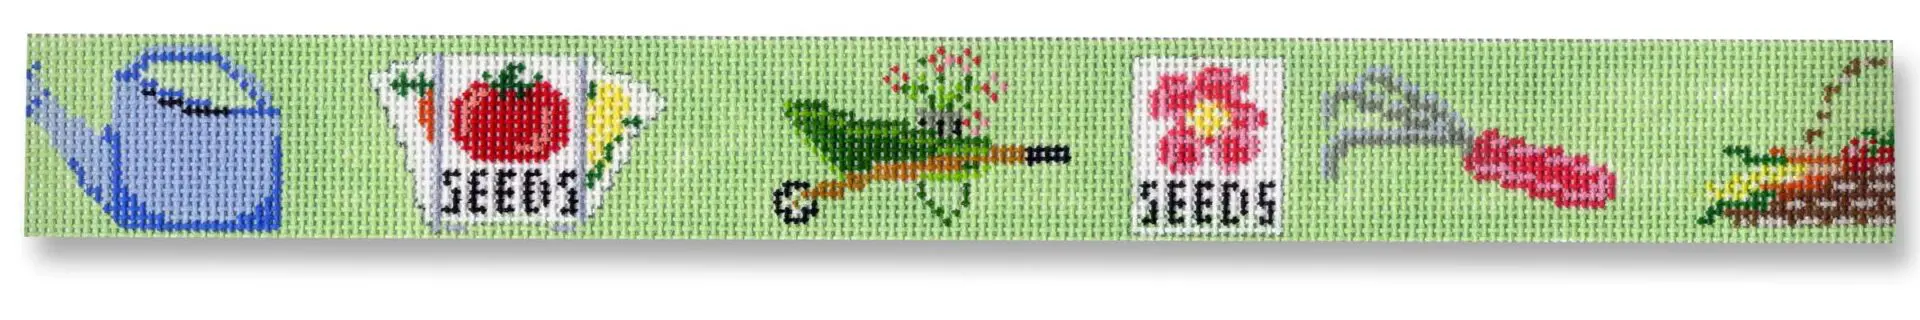 A cross stitch pattern of various items on a green background.